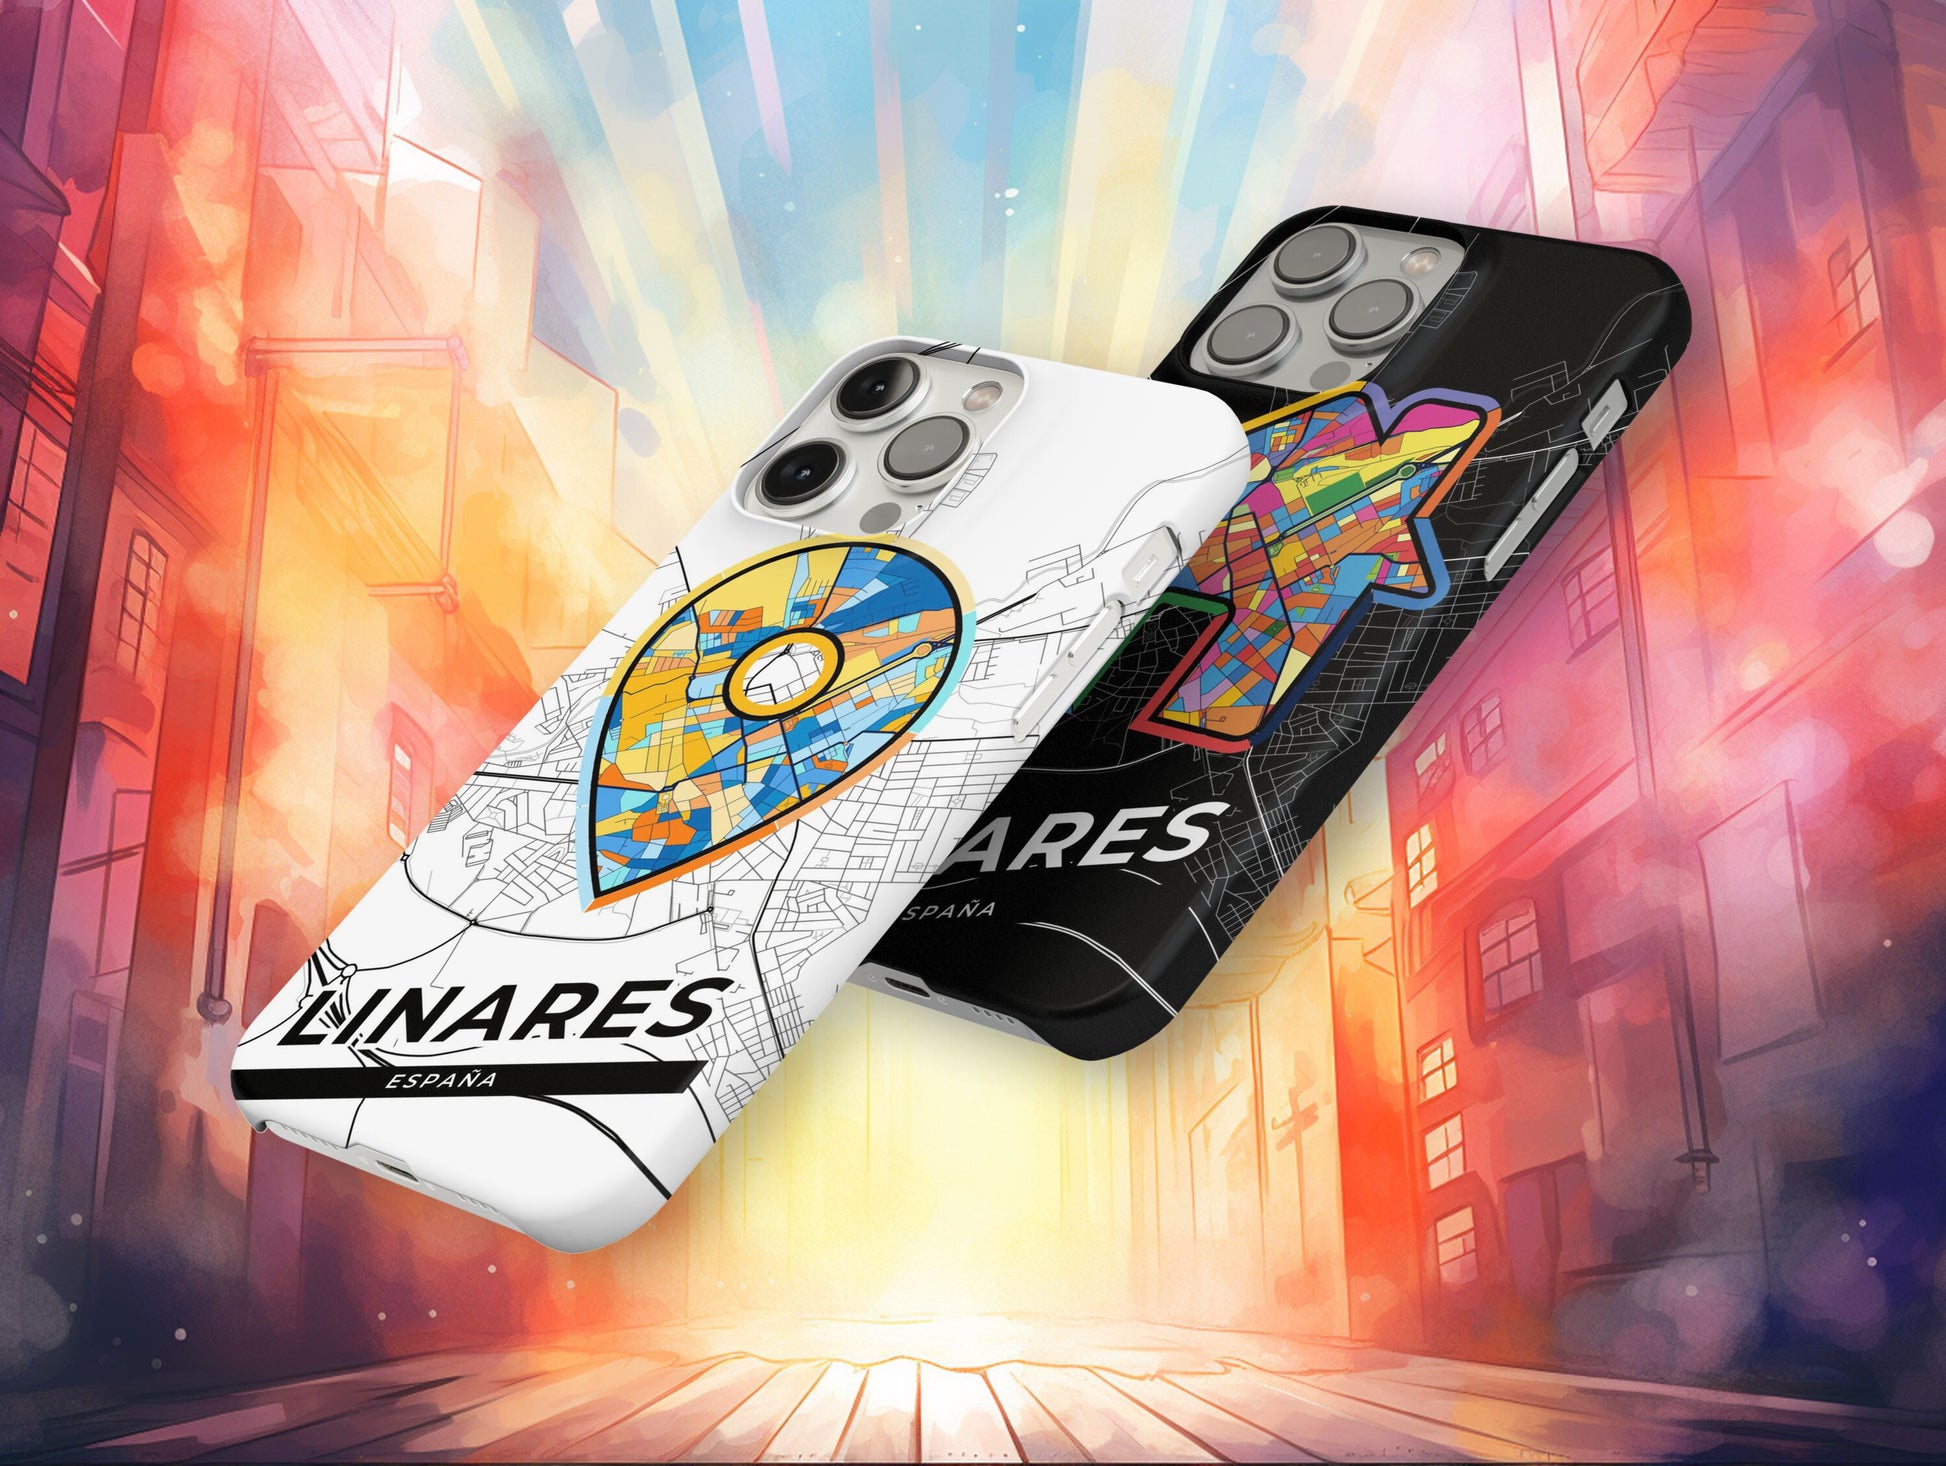 Linares Spain slim phone case with colorful icon. Birthday, wedding or housewarming gift. Couple match cases.